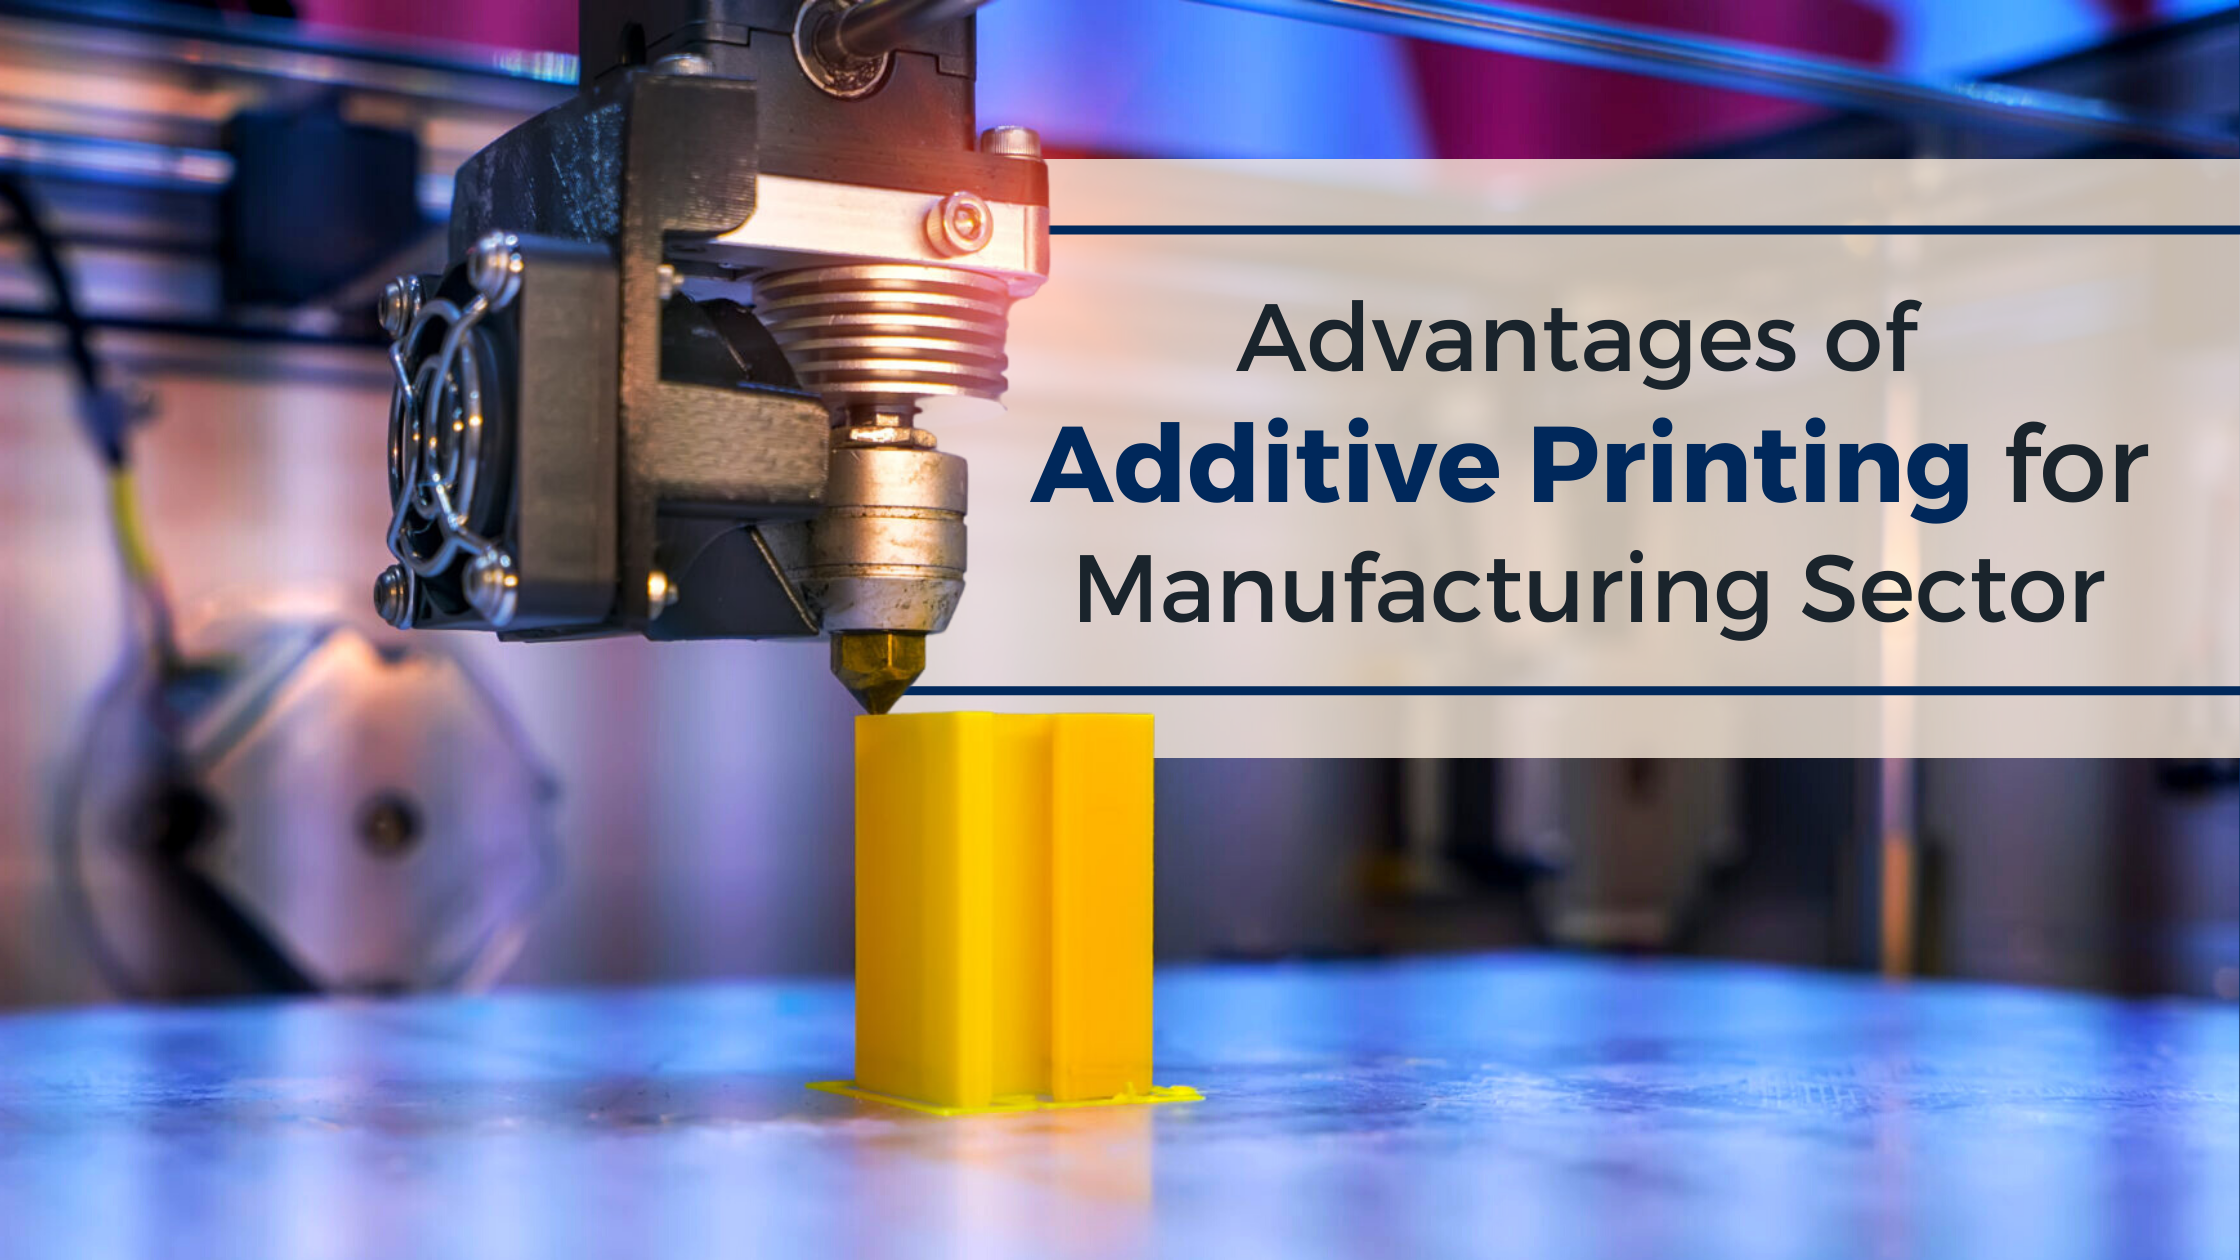 Additive Printing for Manufacturing Sector